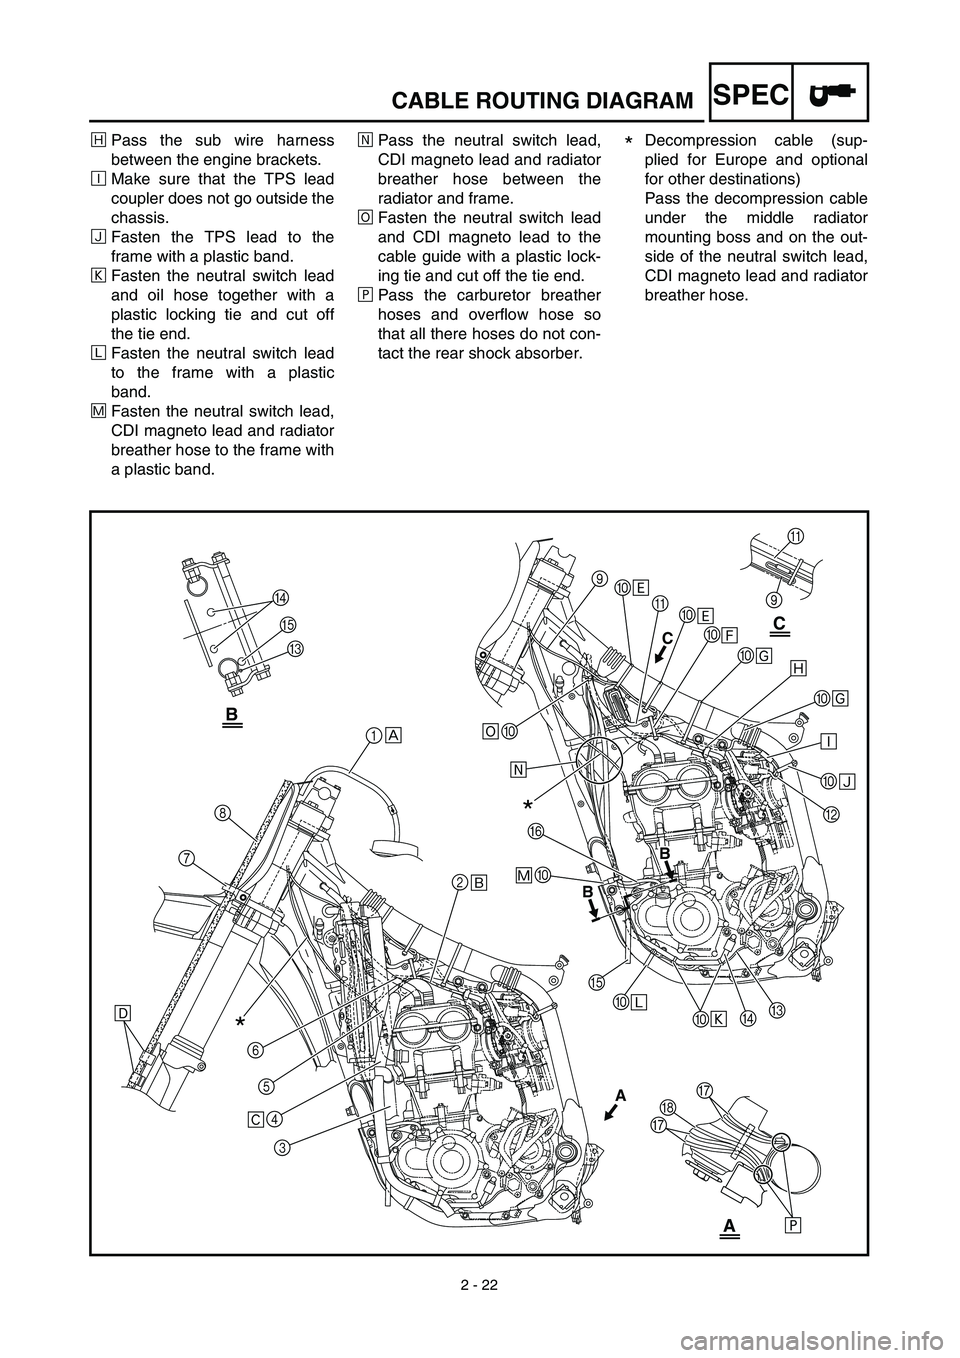 YAMAHA YZ450F 2003  Owners Manual 2 - 22
SPECCABLE ROUTING DIAGRAM
ÓPass the sub wire harness
between the engine brackets.
ÈMake sure that the TPS lead
coupler does not go outside the
chassis.
ÔFasten the TPS lead to the
frame with